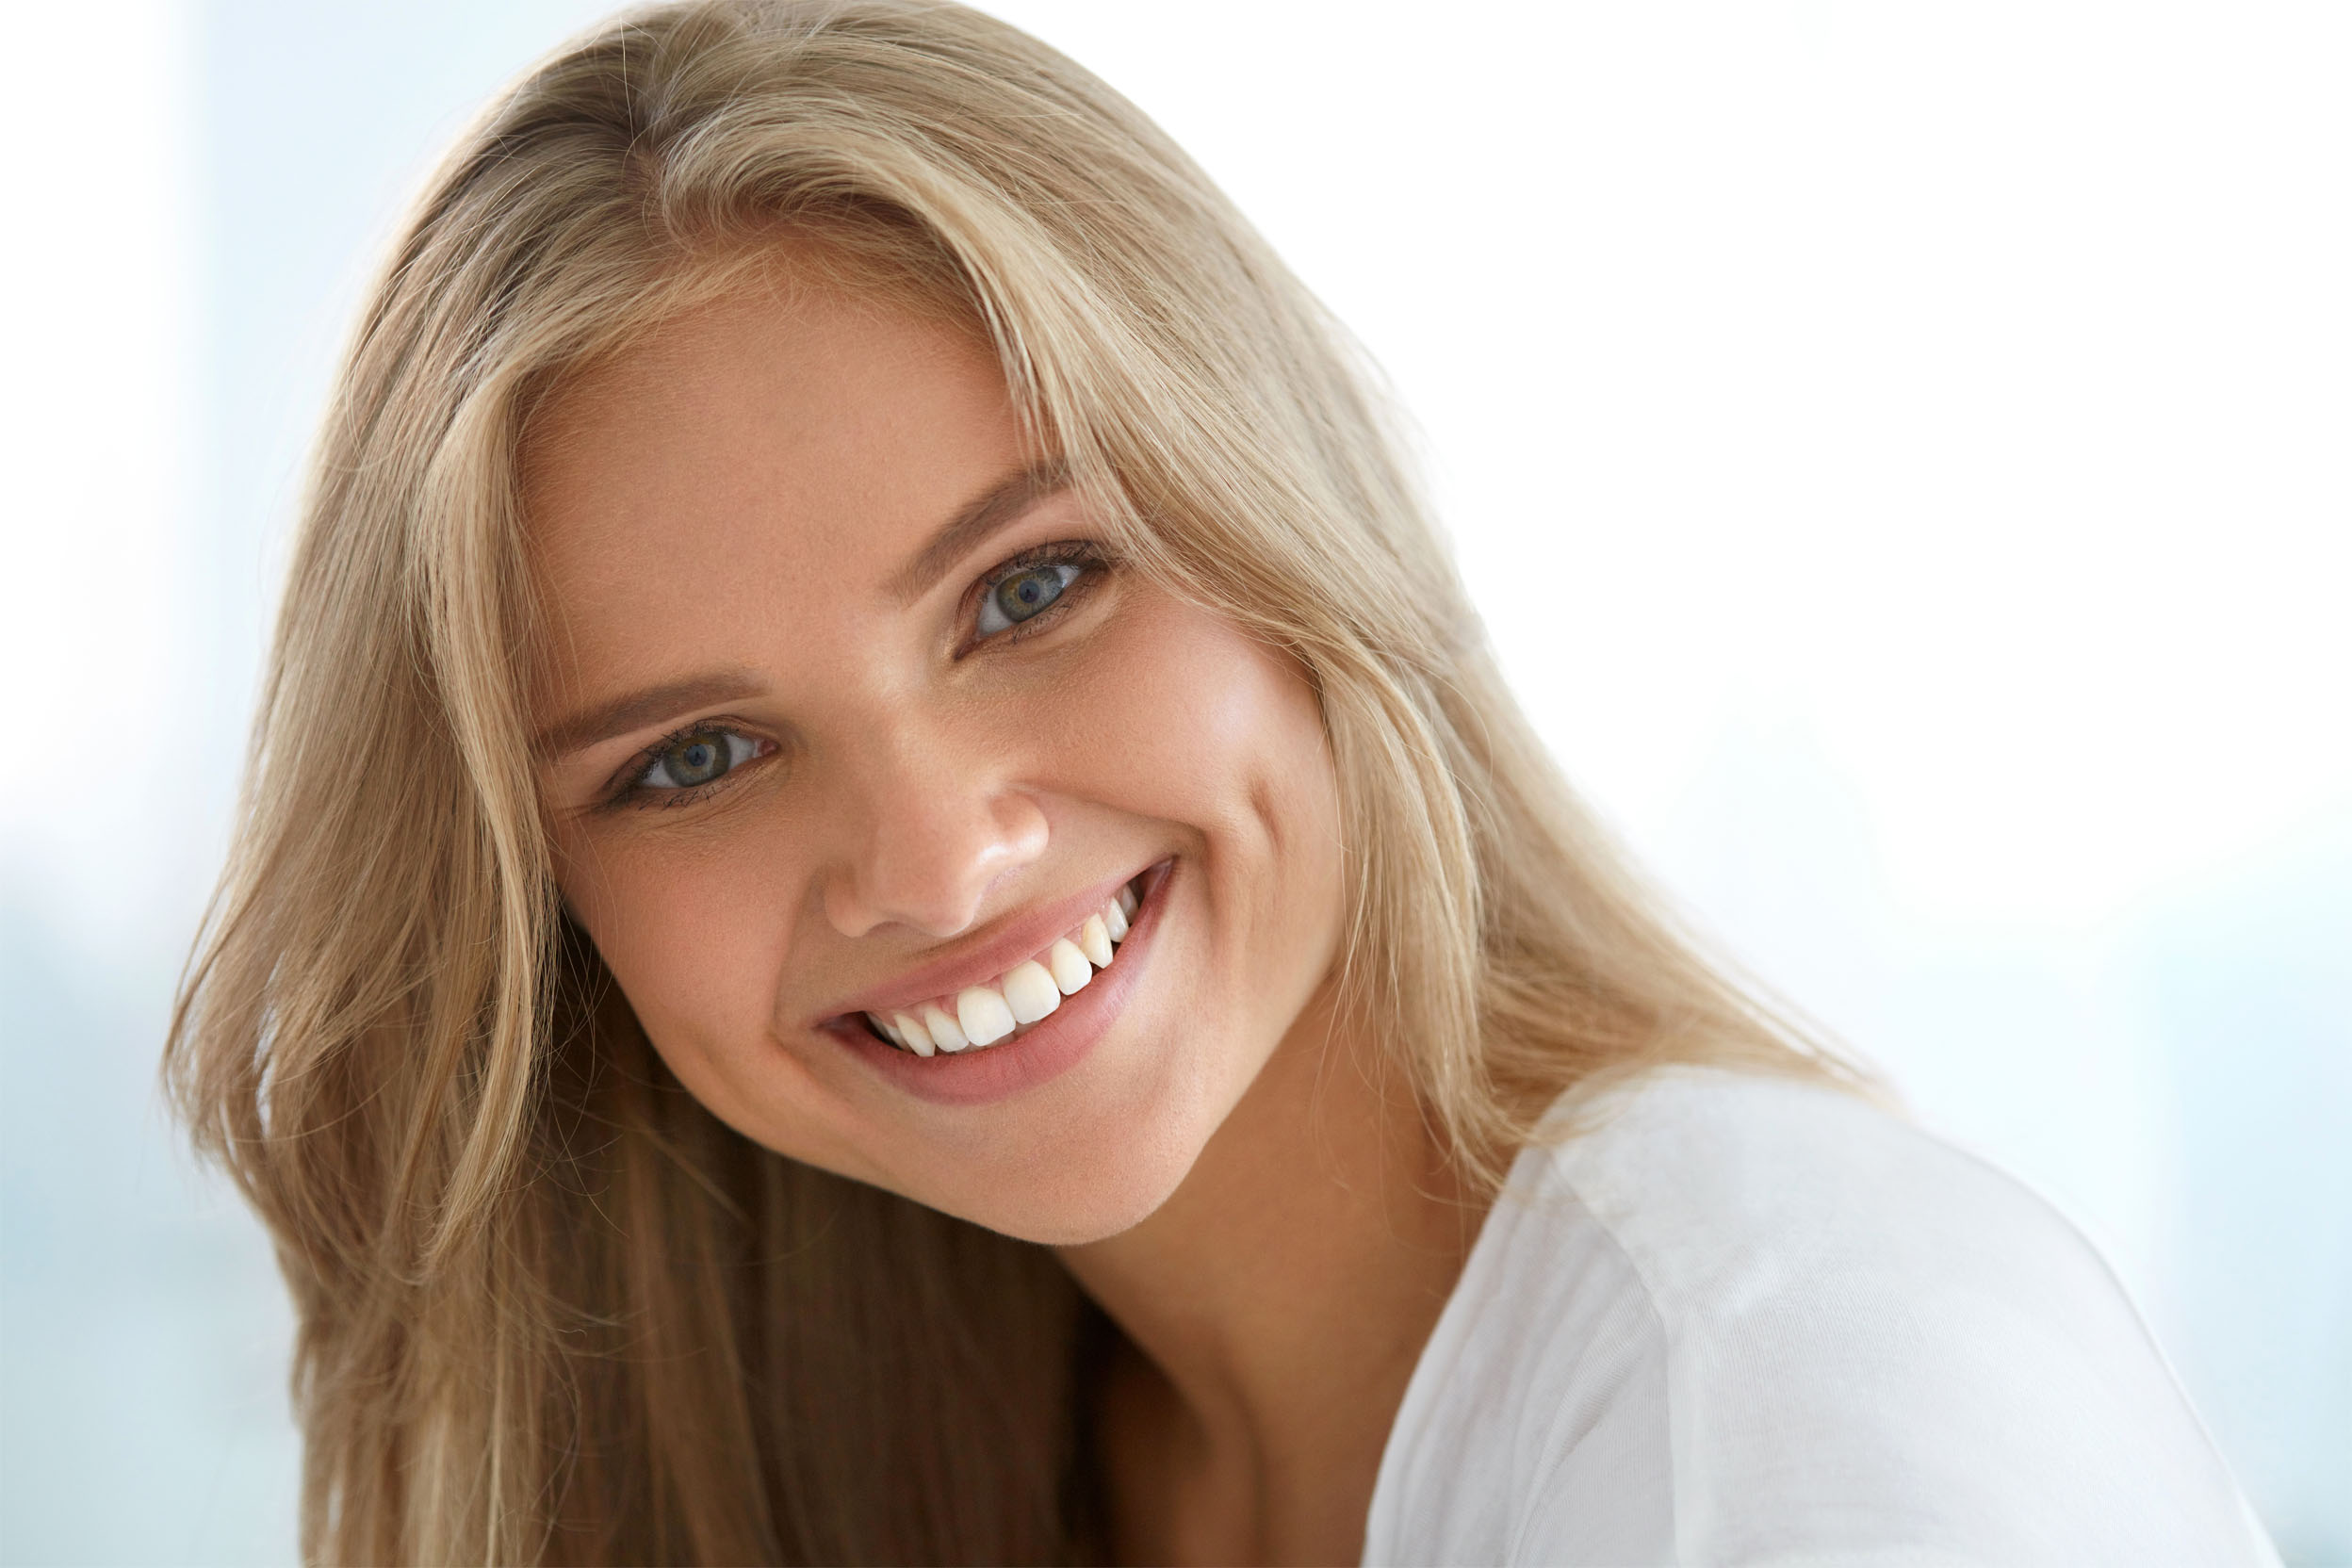 Young woman with a perfect smile